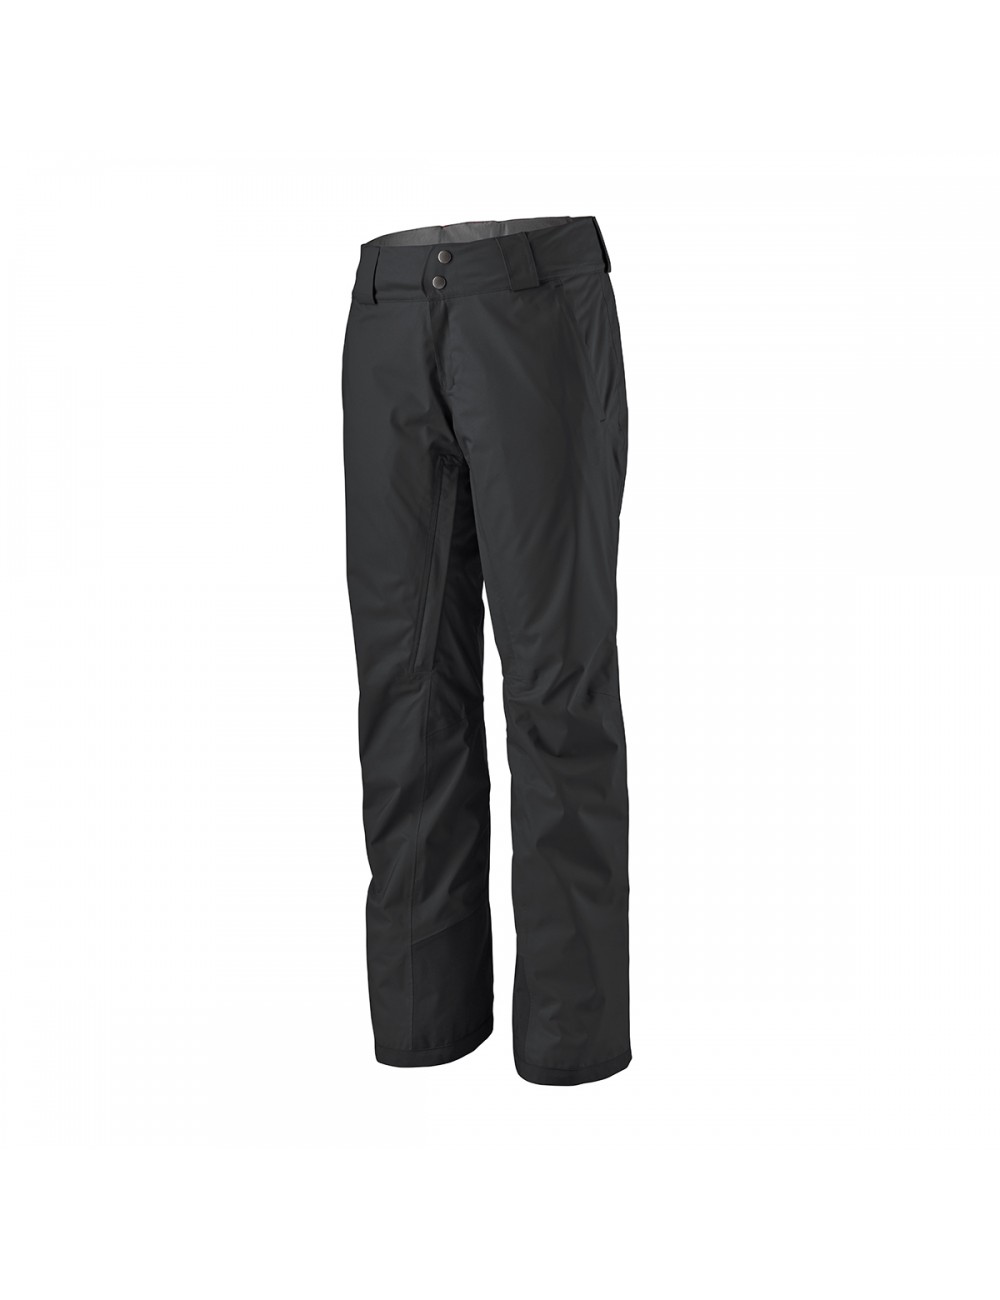 Patagonia Insulated Snowbelle Pants - Black